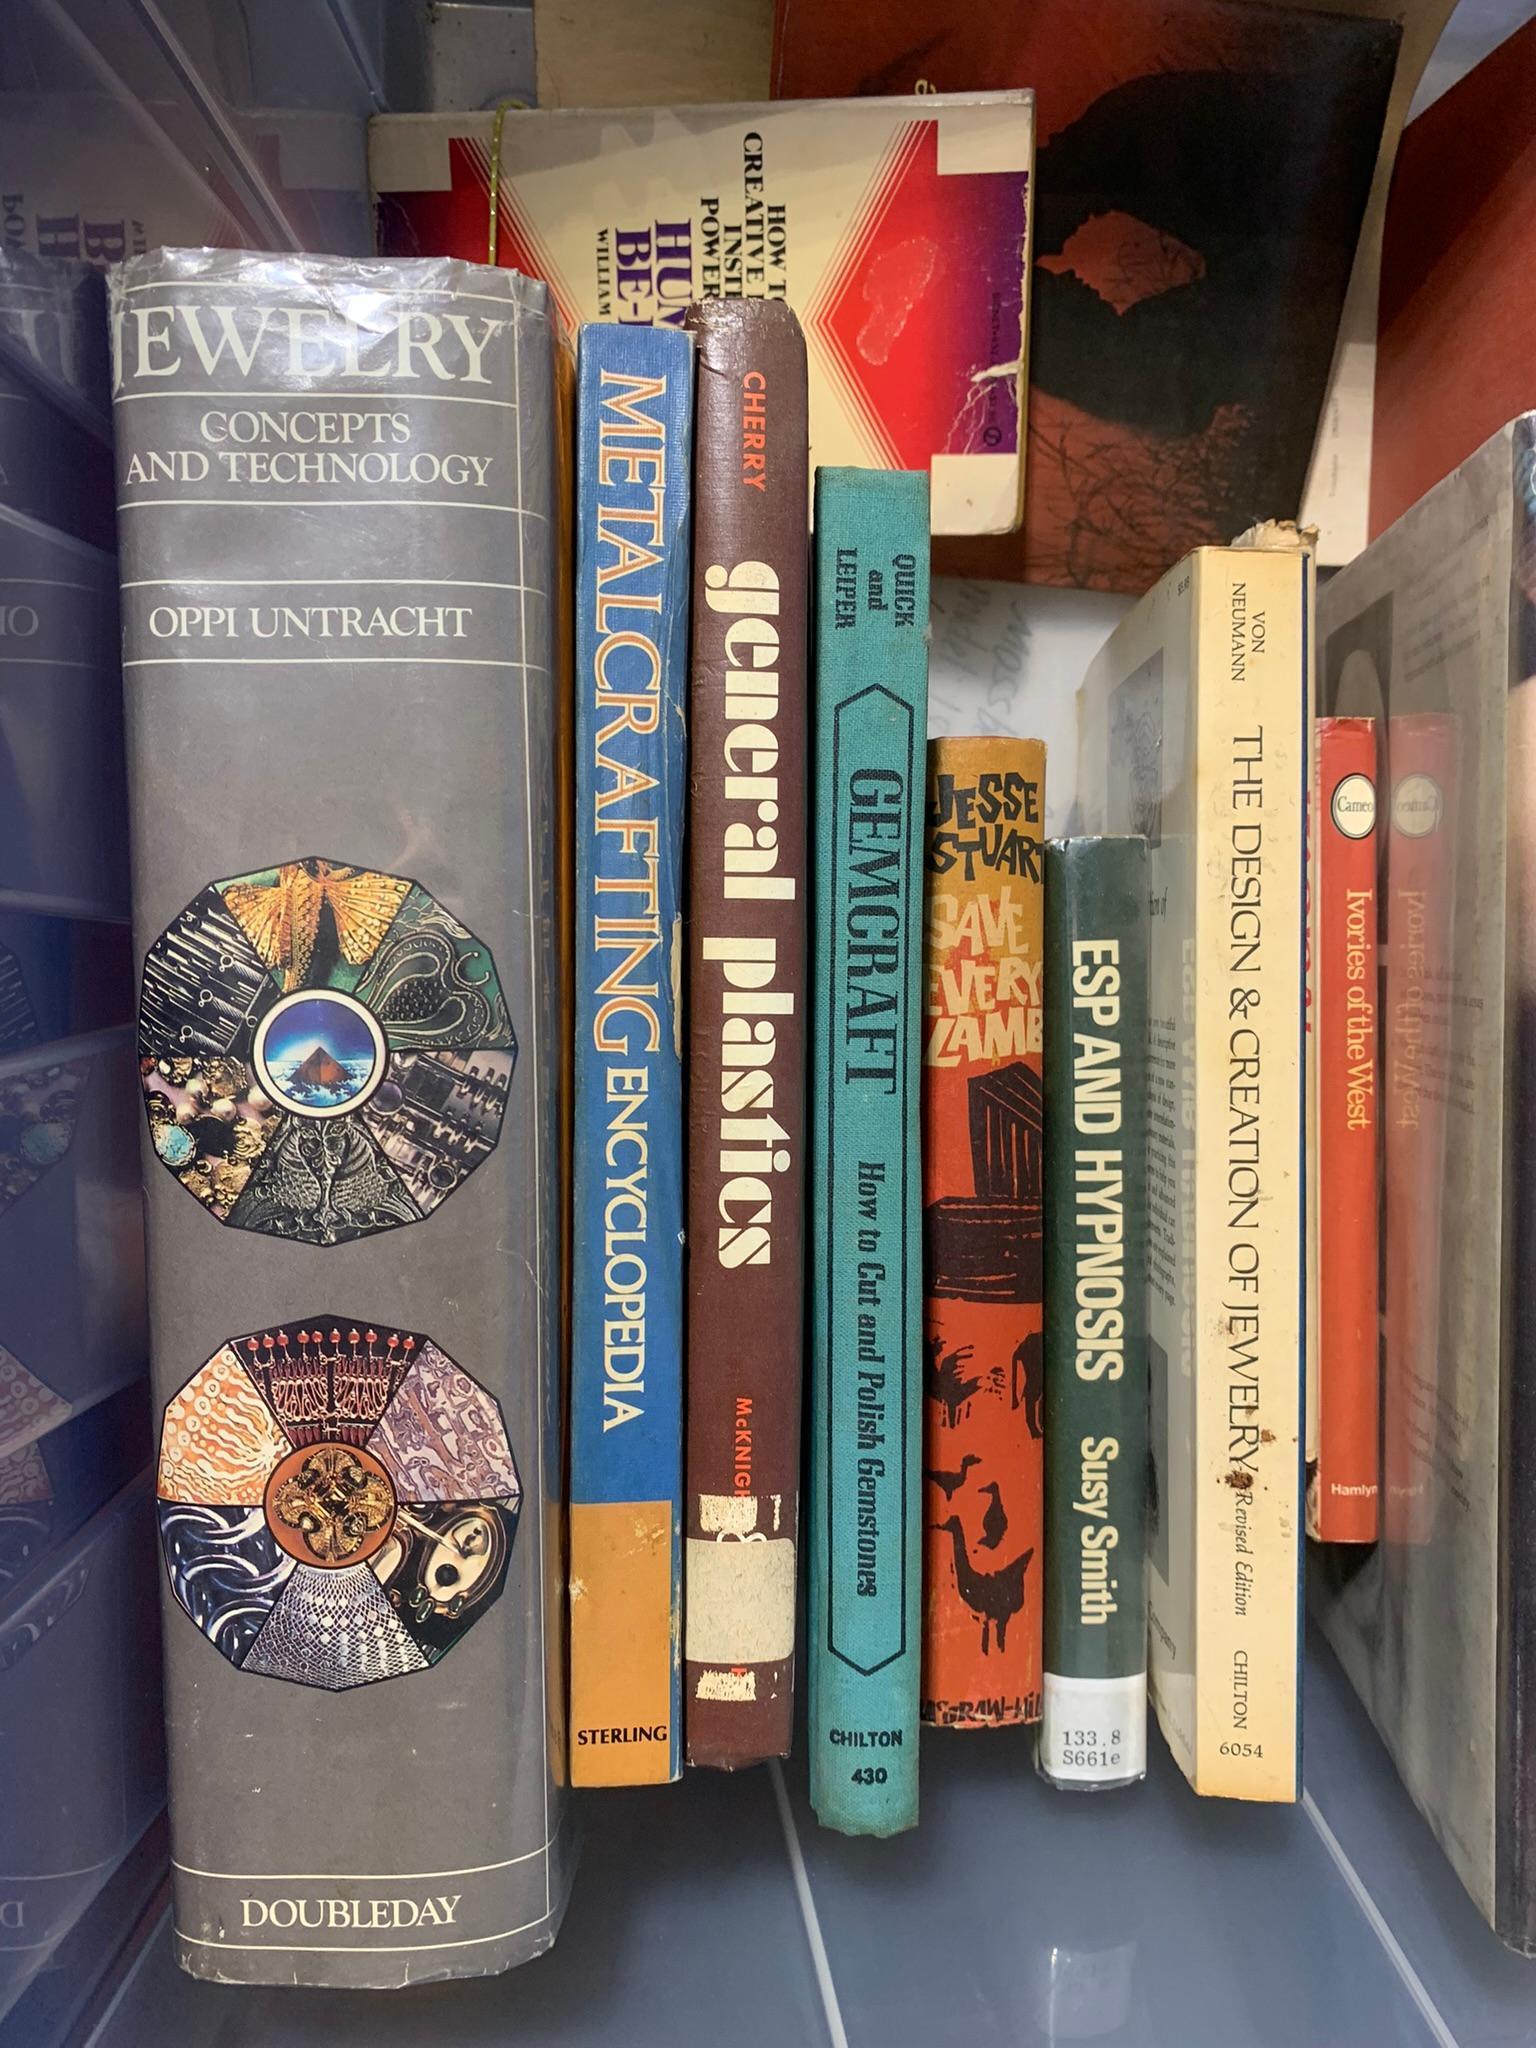 Group of Assorted Books